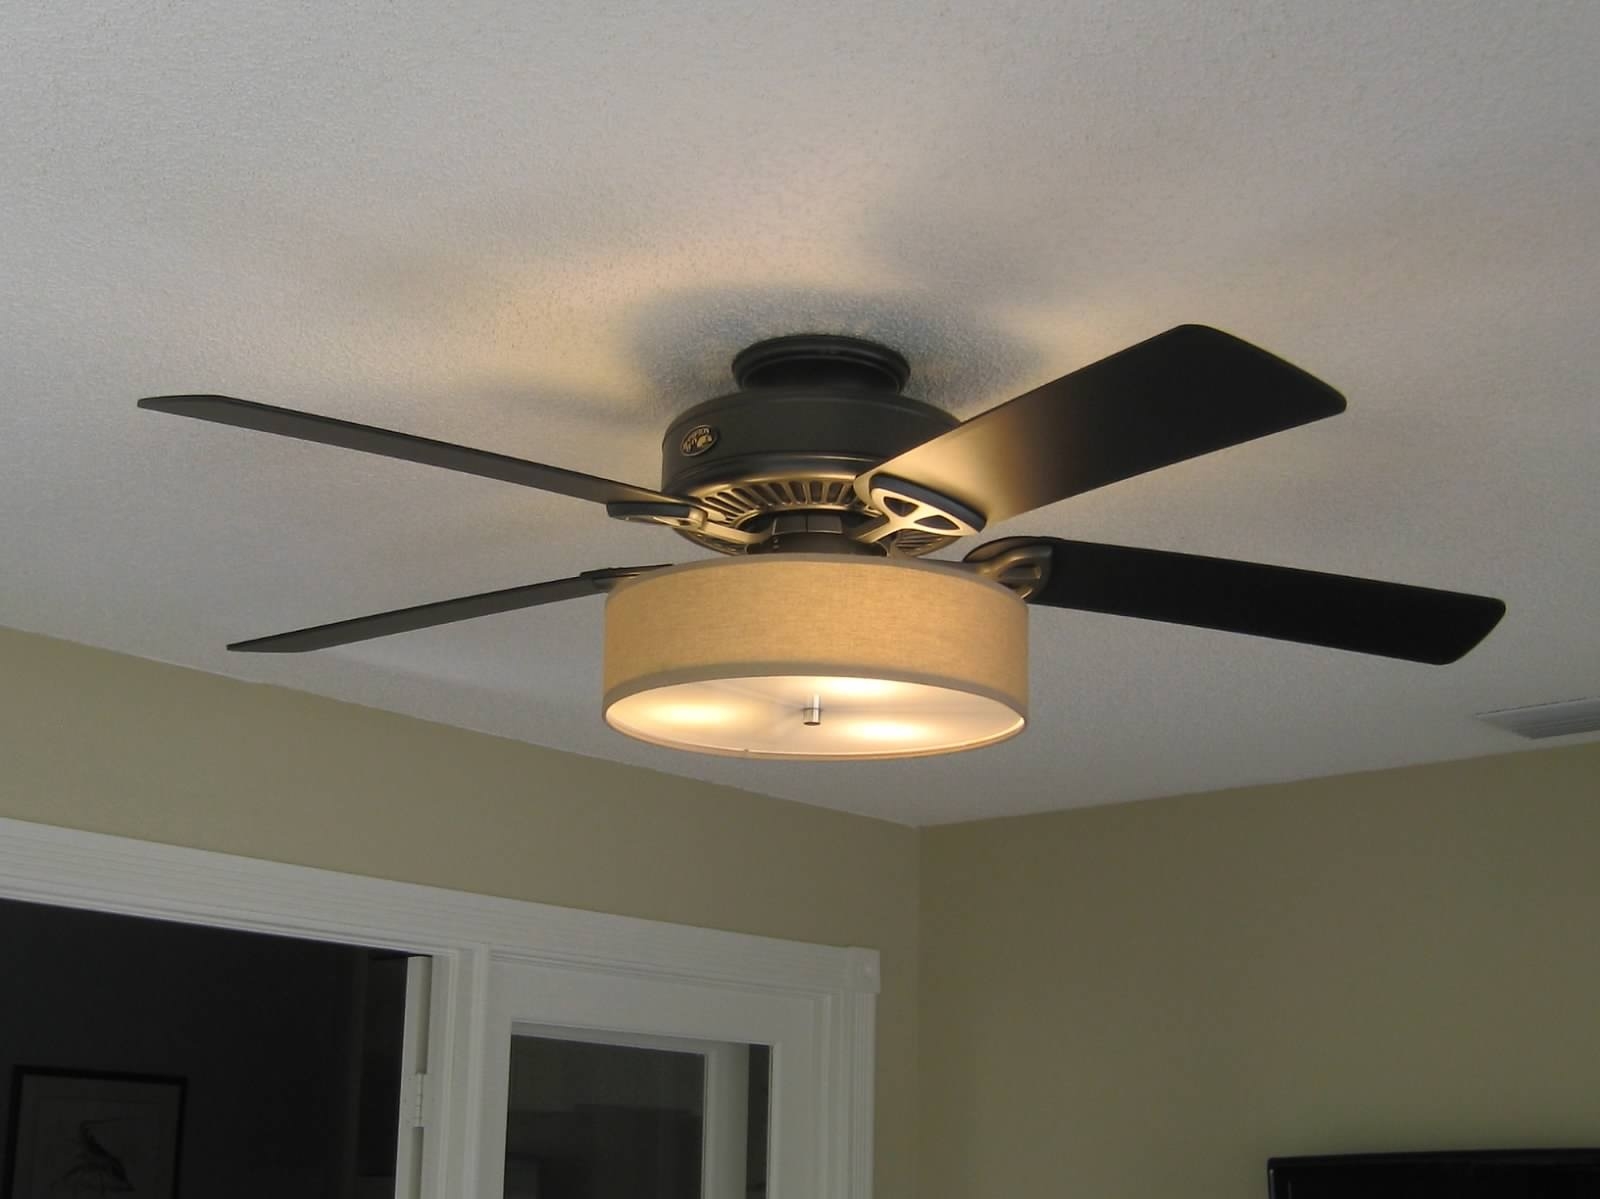 Permalink to Drum Light Kit For Ceiling Fan